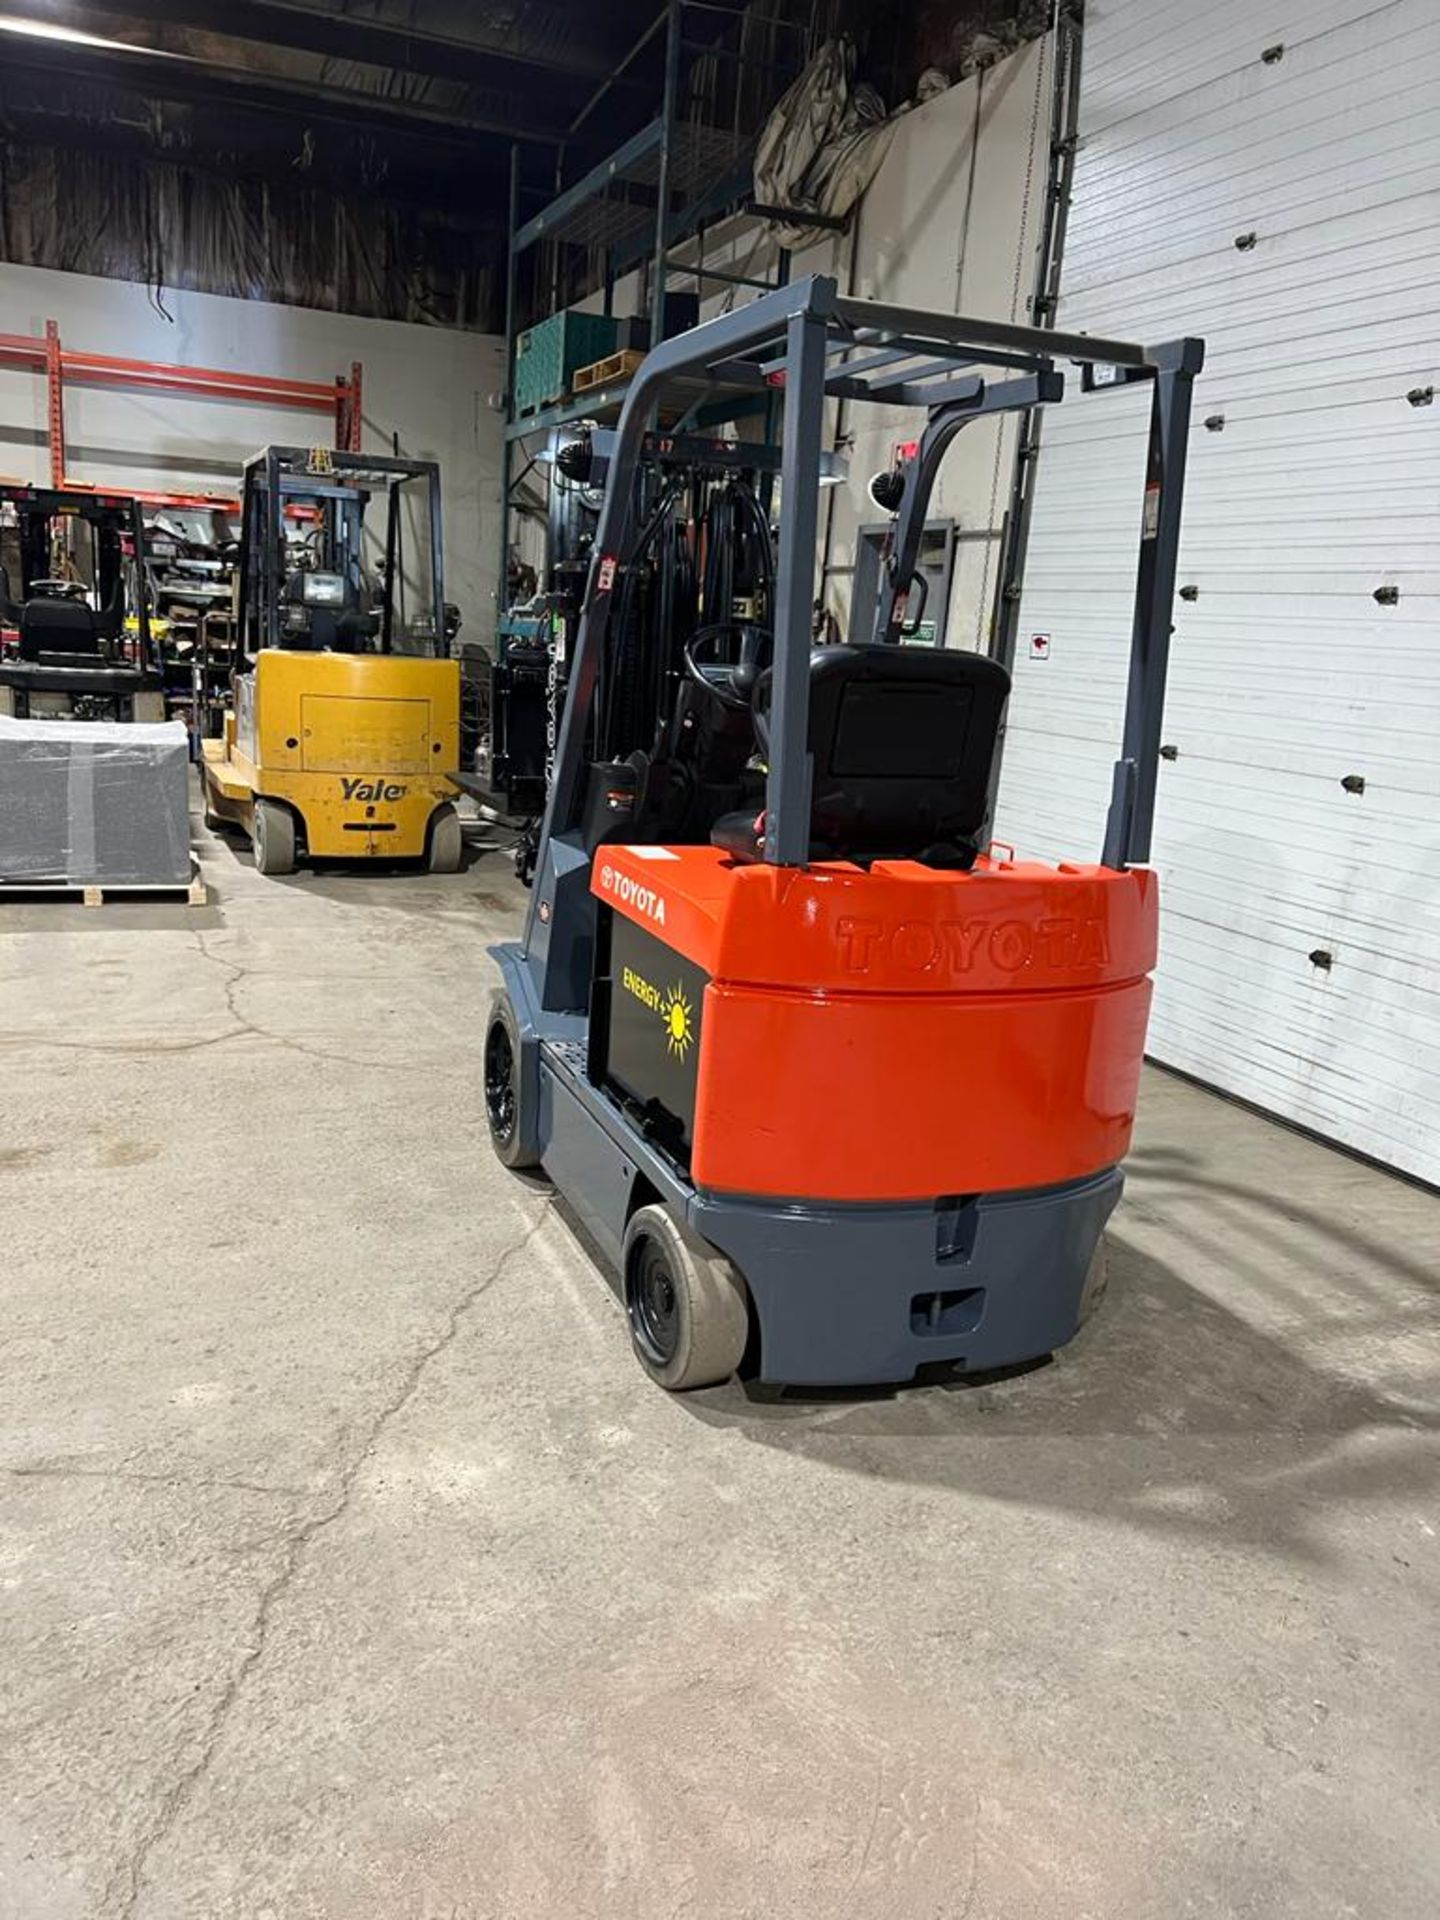 NICE Toyota 4,000lbs Capacity Forklift Electric with 4-STAGE Mast, NEW 48V Battery, Sideshift - FREE - Image 2 of 3